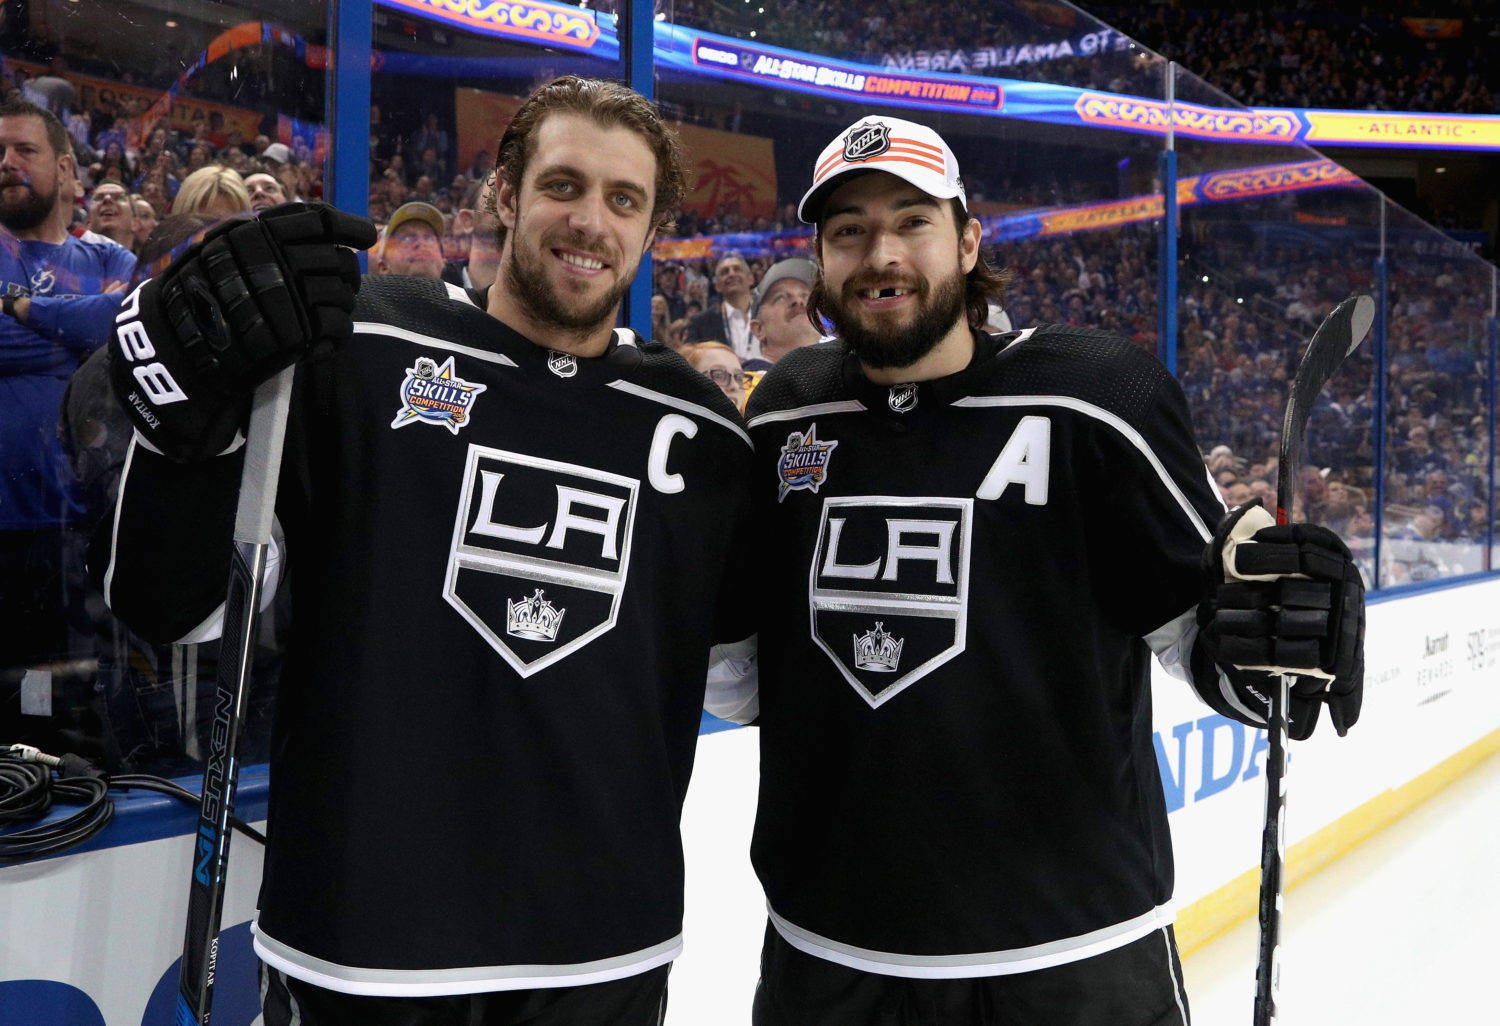 Los Angeles Kings center Anze Kopitar, center, poses for pictures